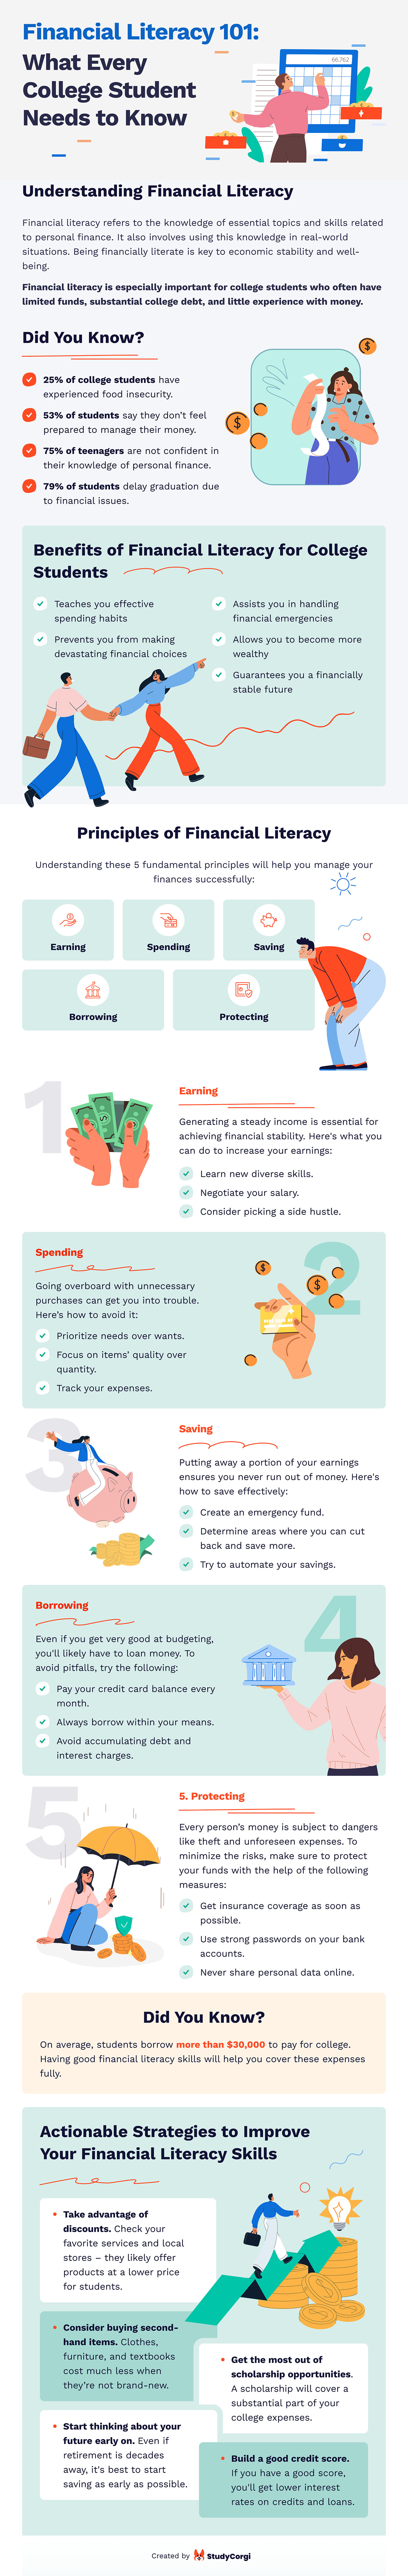 The infographic explains why financial literacy is important for college students and offers tips on personal finance.